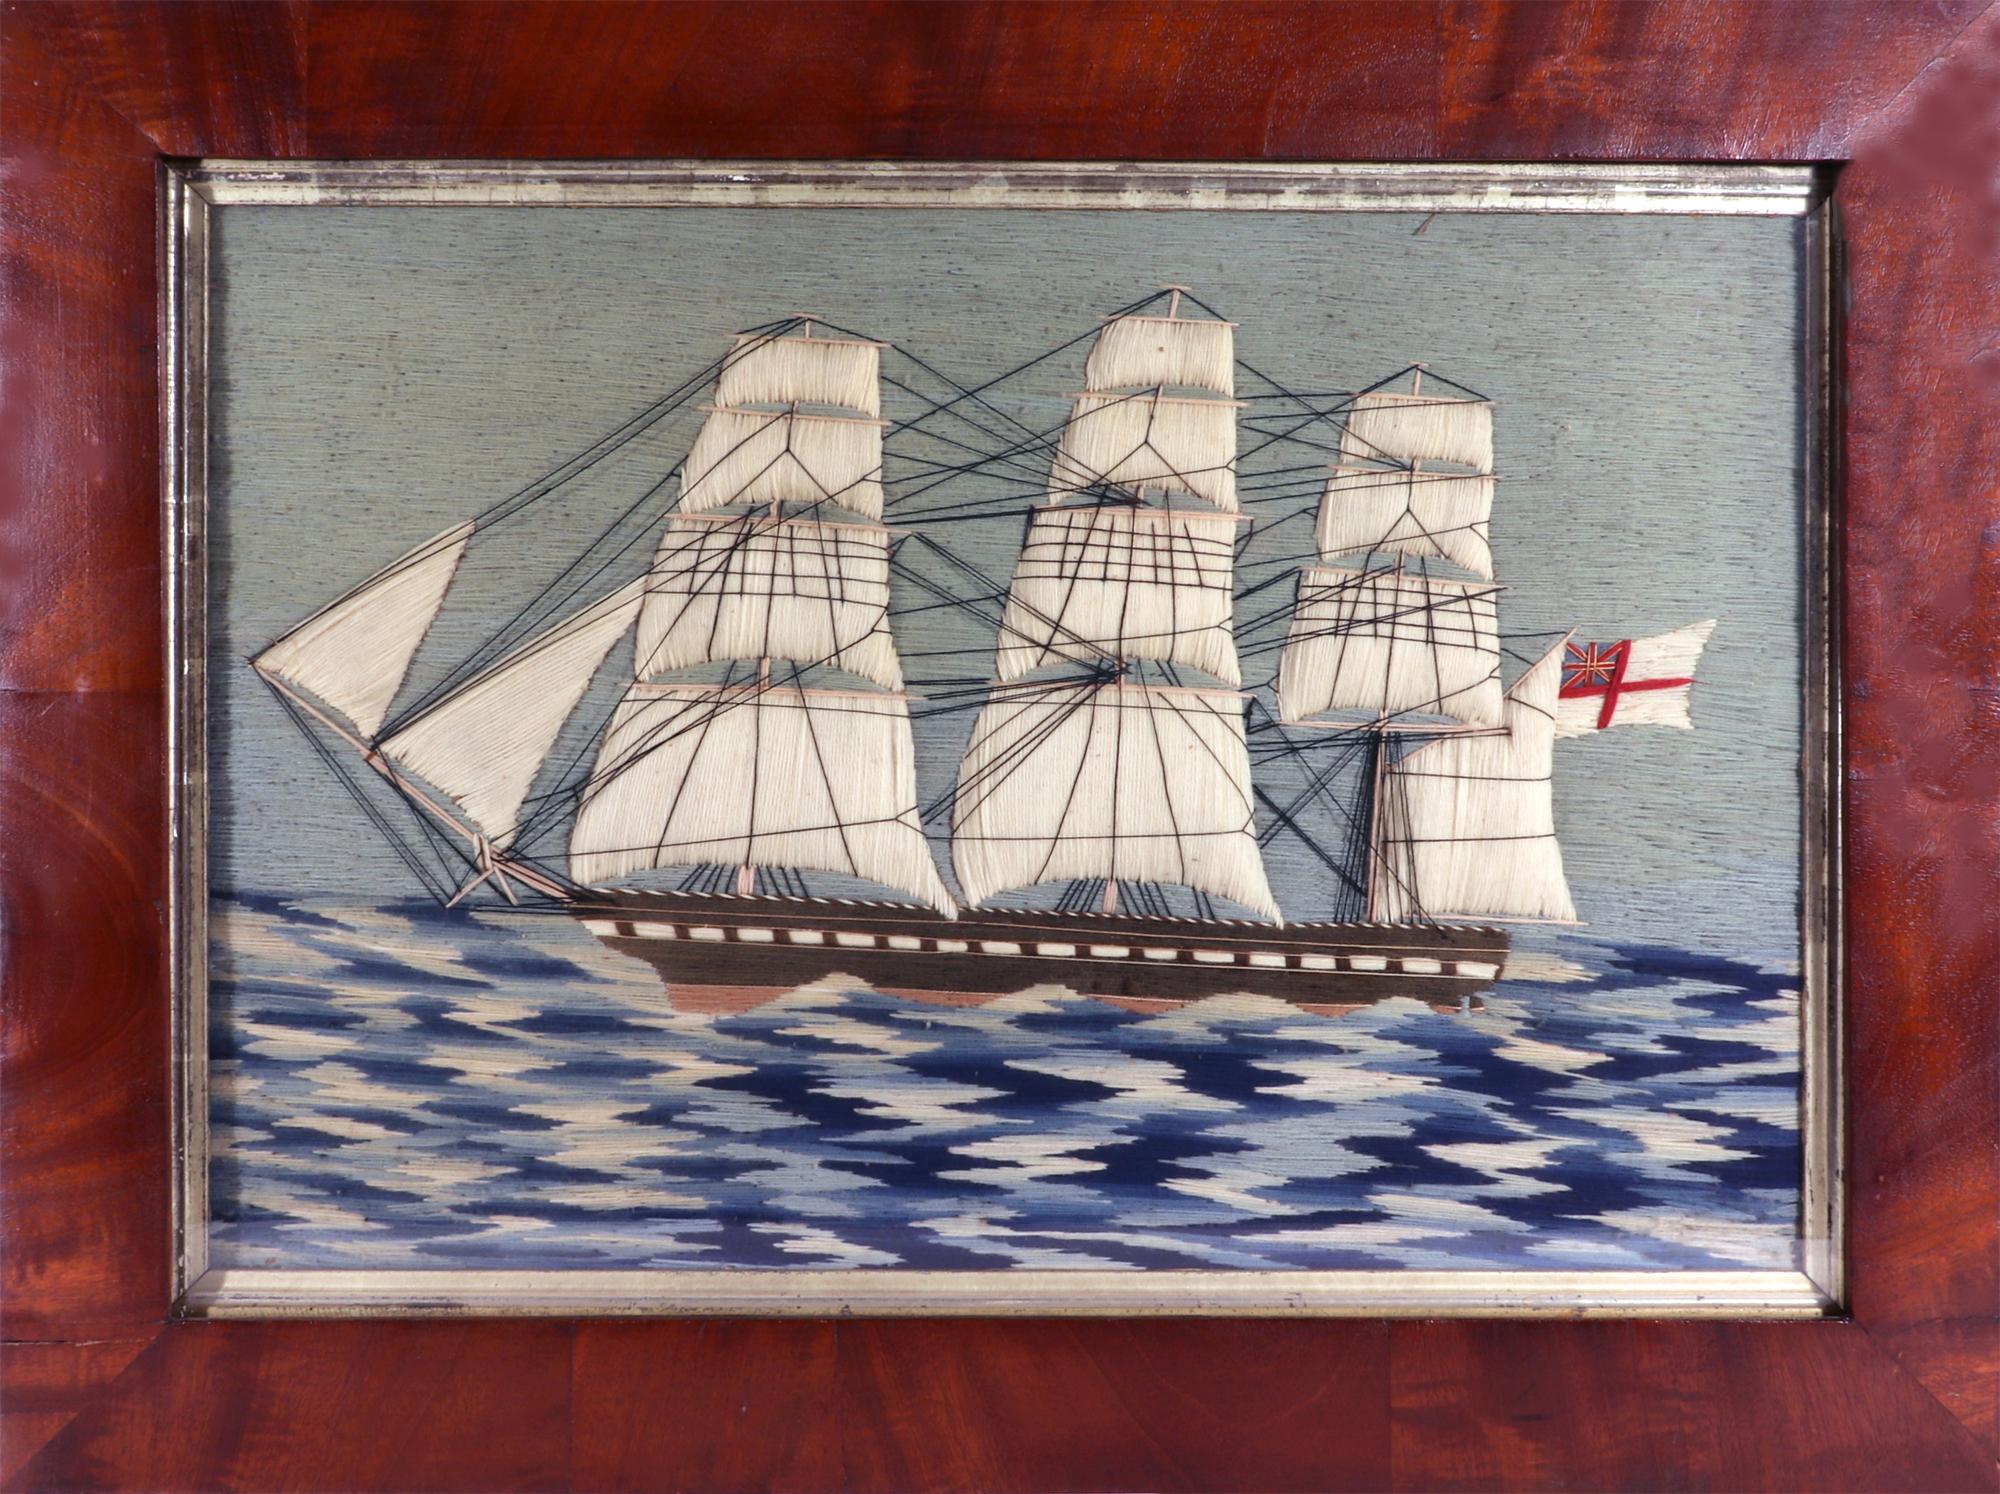 Sailor's Woolwork of Royal Navy on Checkerboard Sea,
circa 1865

The British sailor's woolie depicts a port side view of a three-masted ship with trapunto white sails on a rough sea depicted as a checkerboard in shades of blue. The ship flying